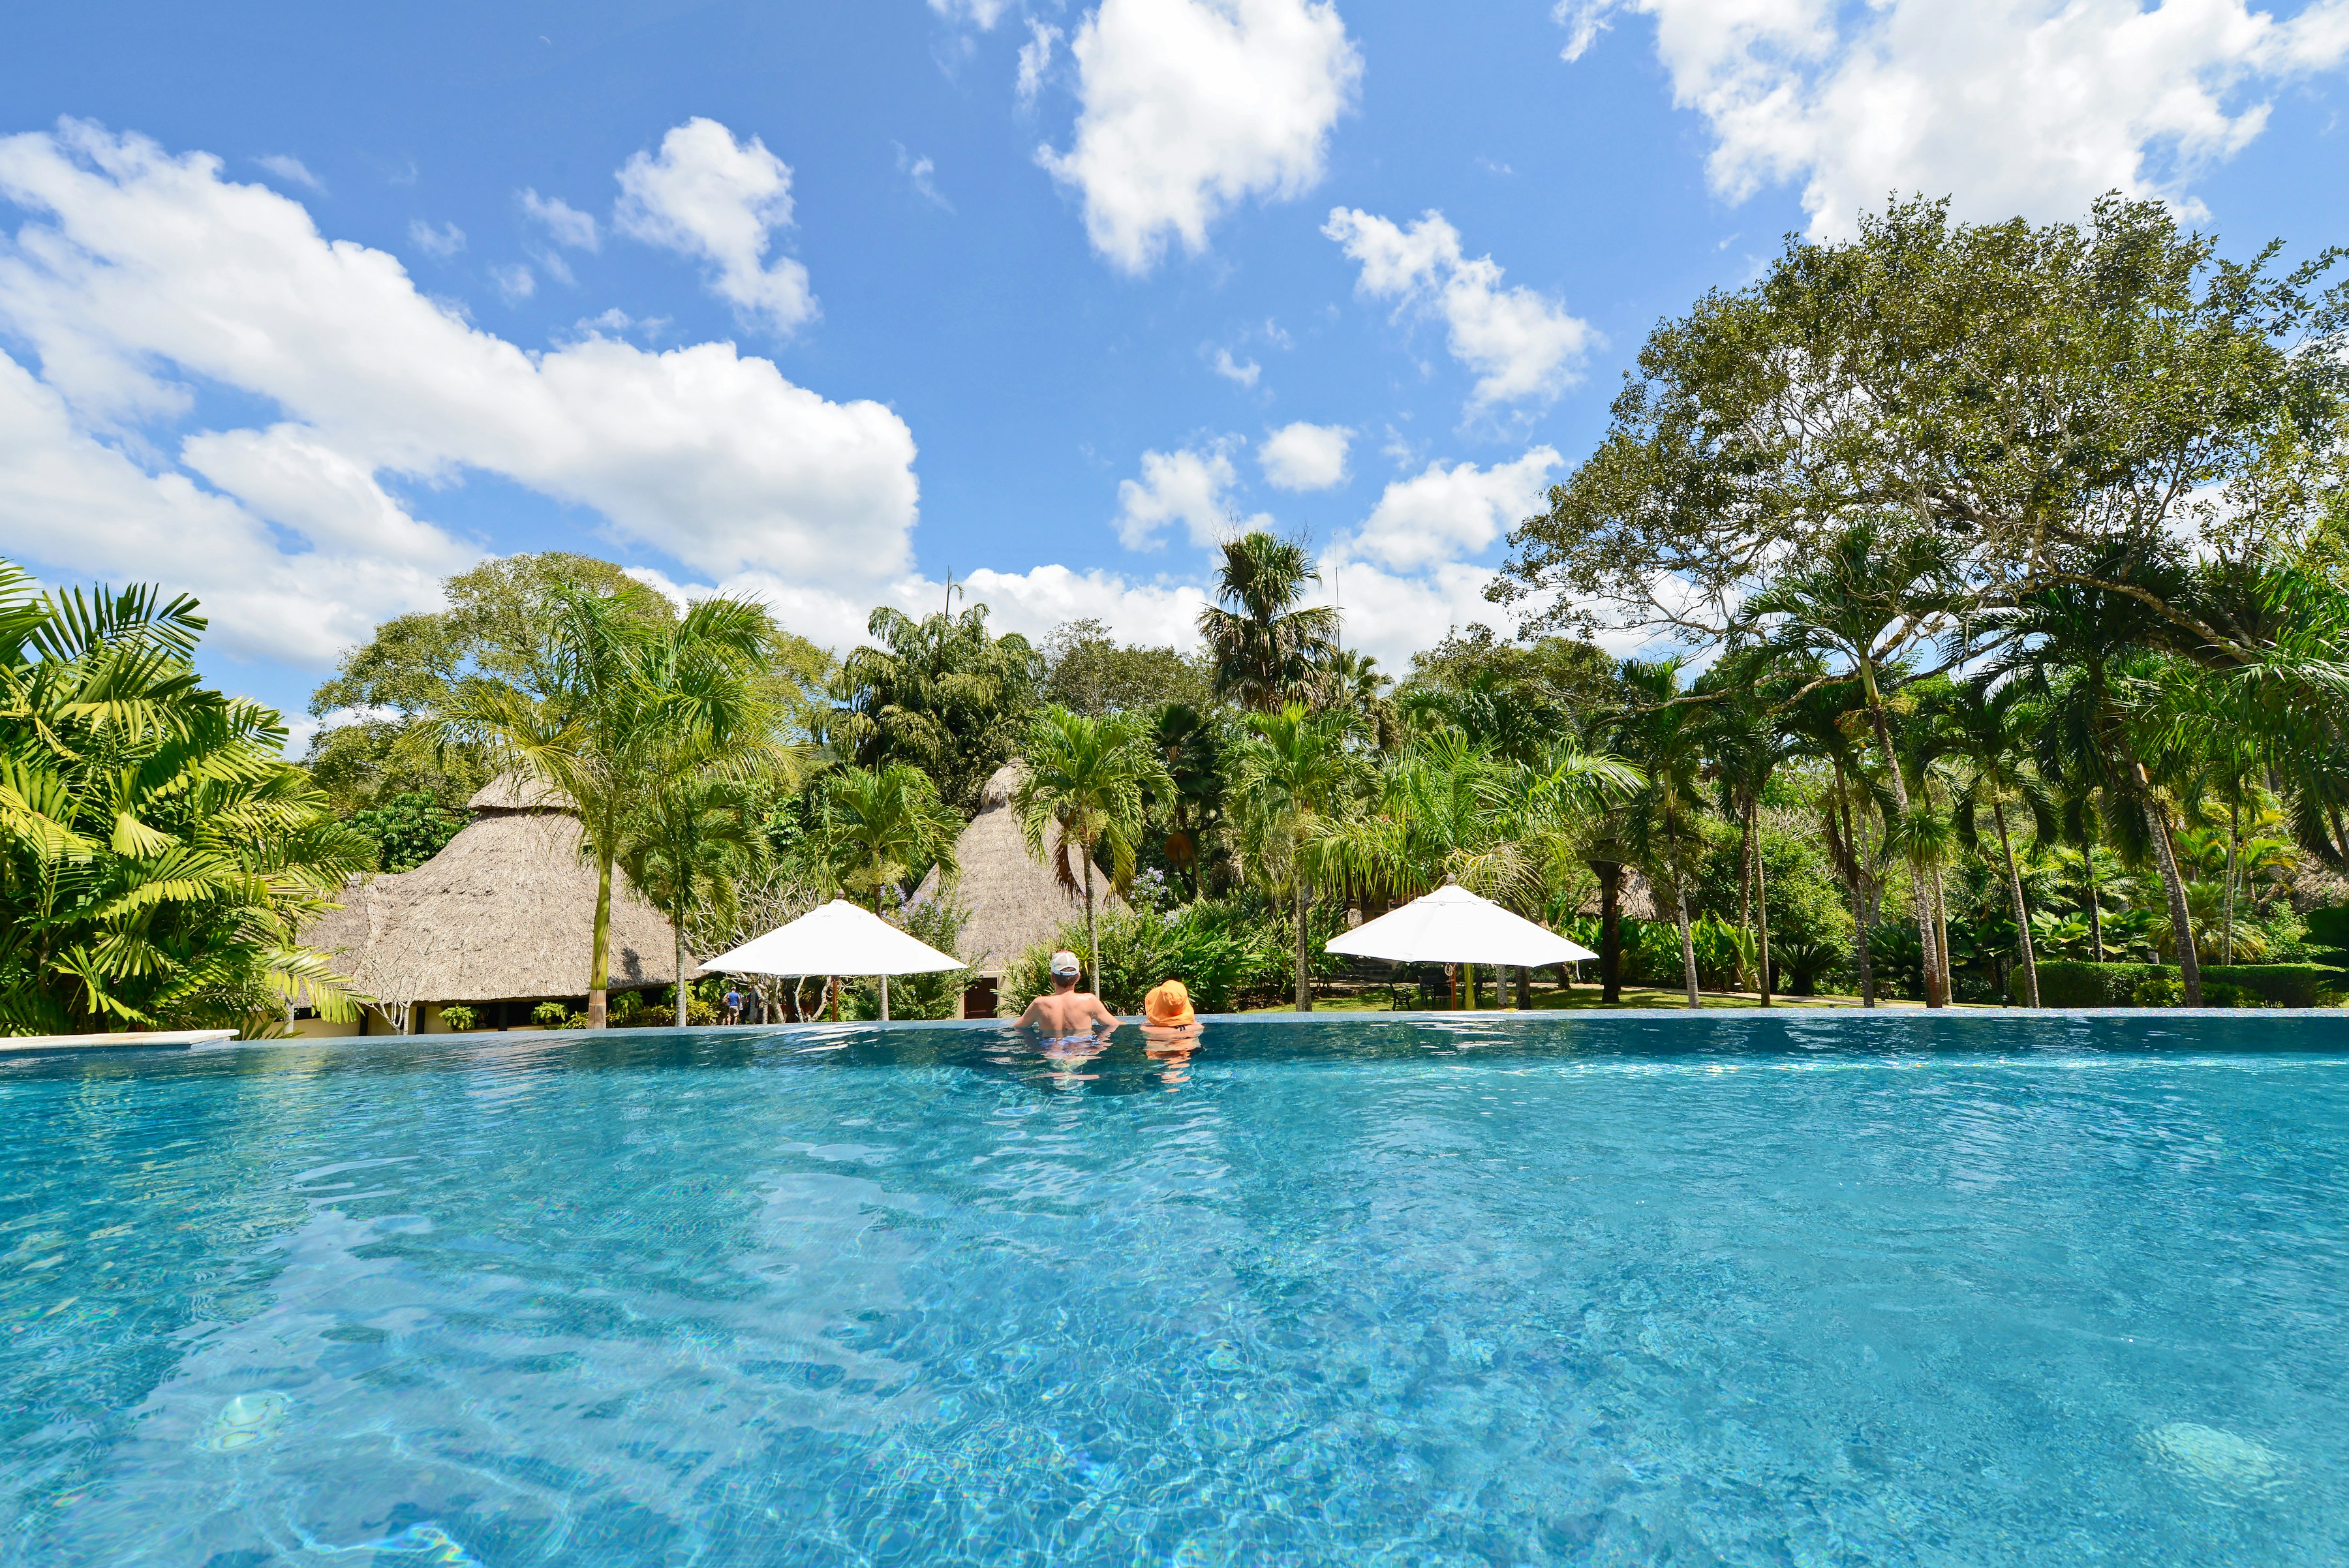 The pool at the Lodge at Chaa Creek, Belize